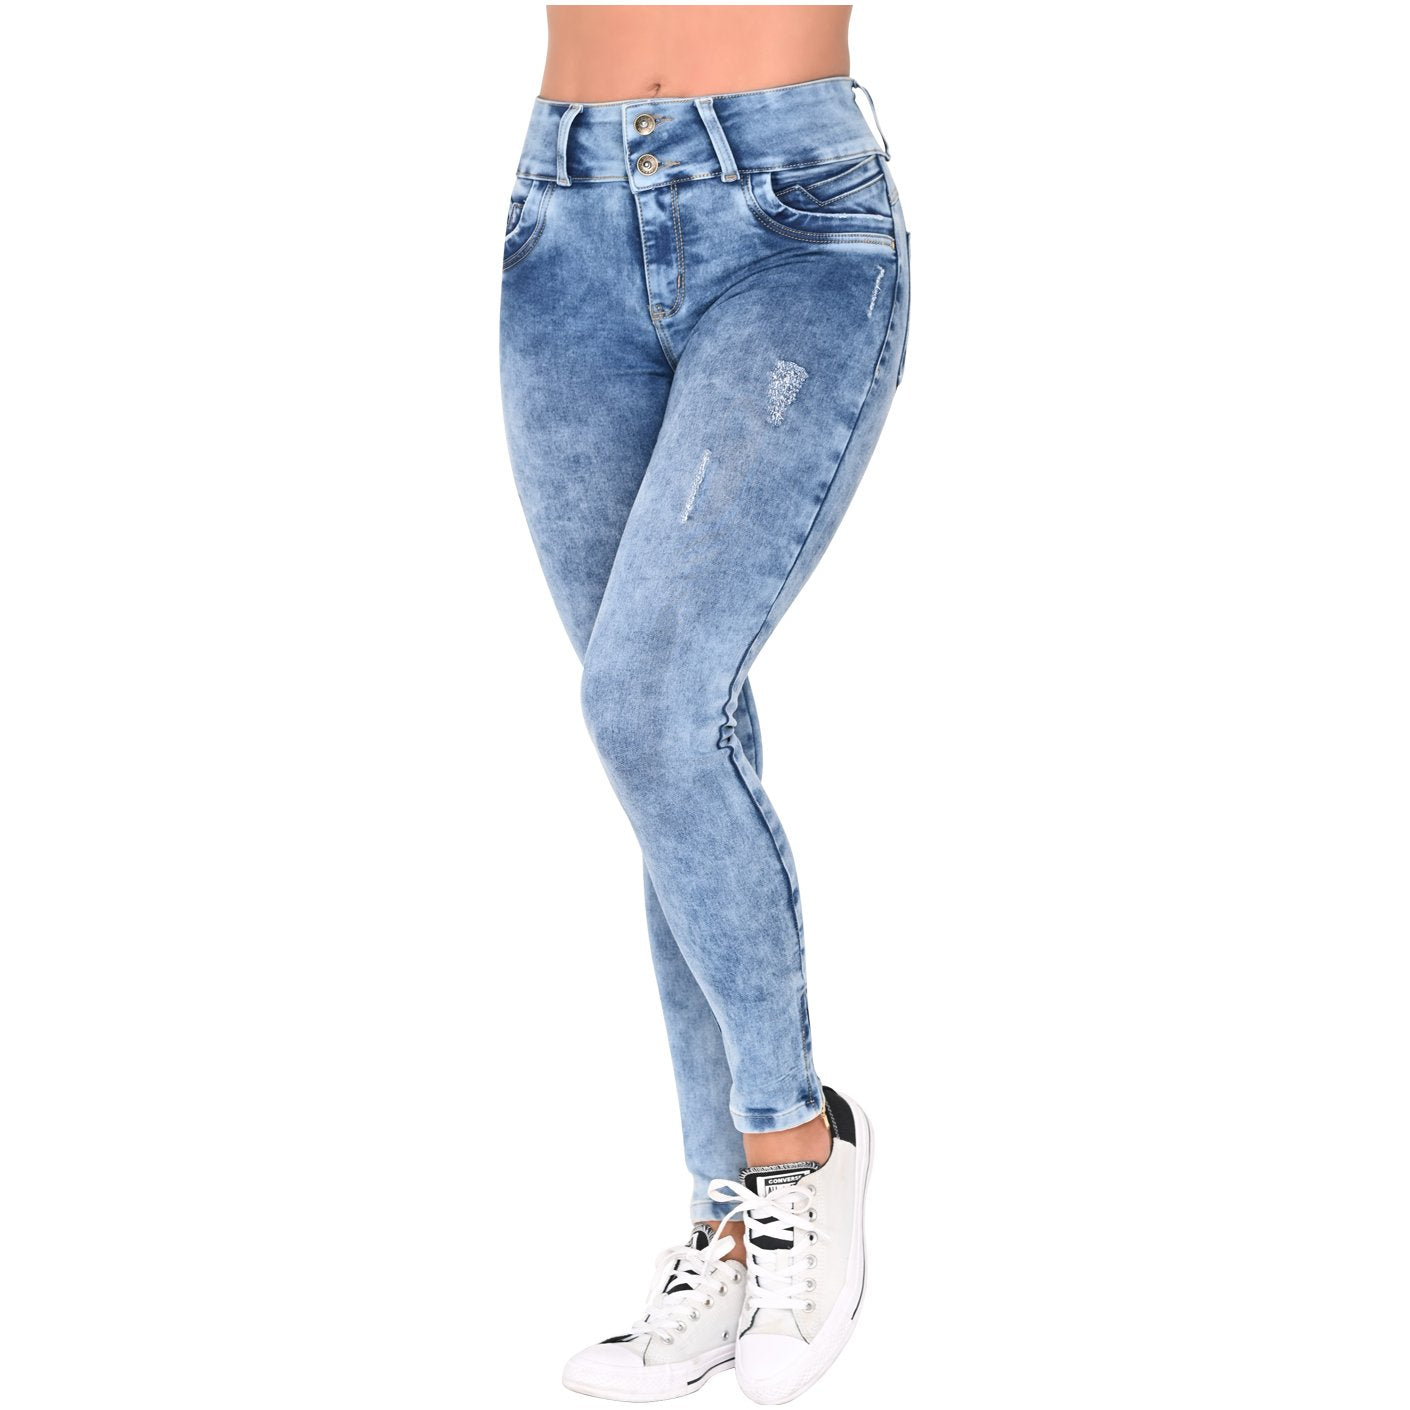 Push-Up Jeans Pre-Washed Style